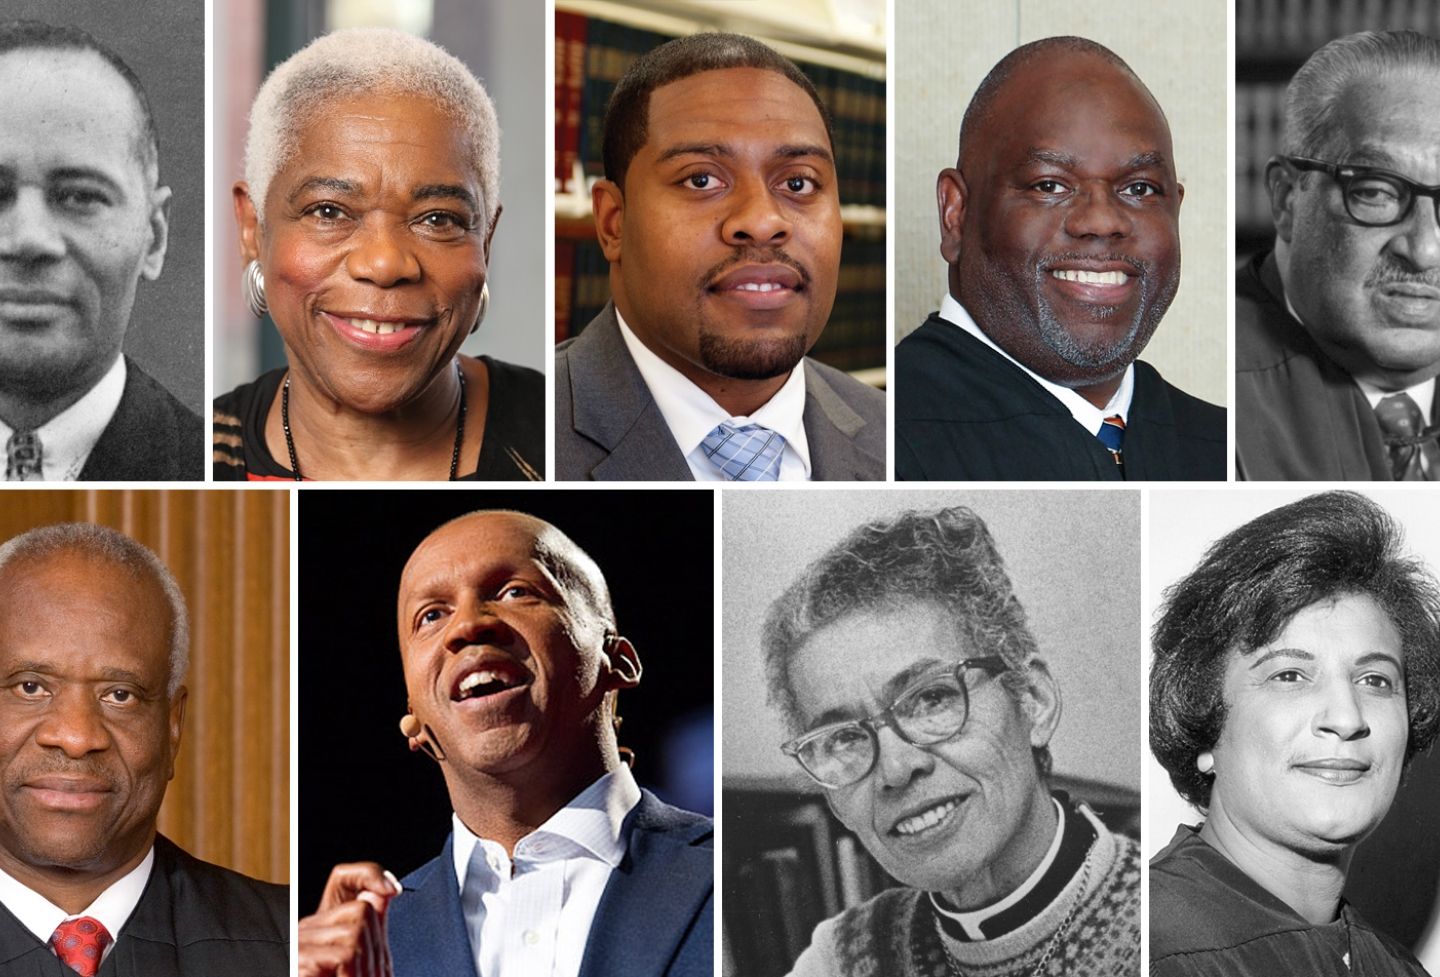 African American lawyers and leaders